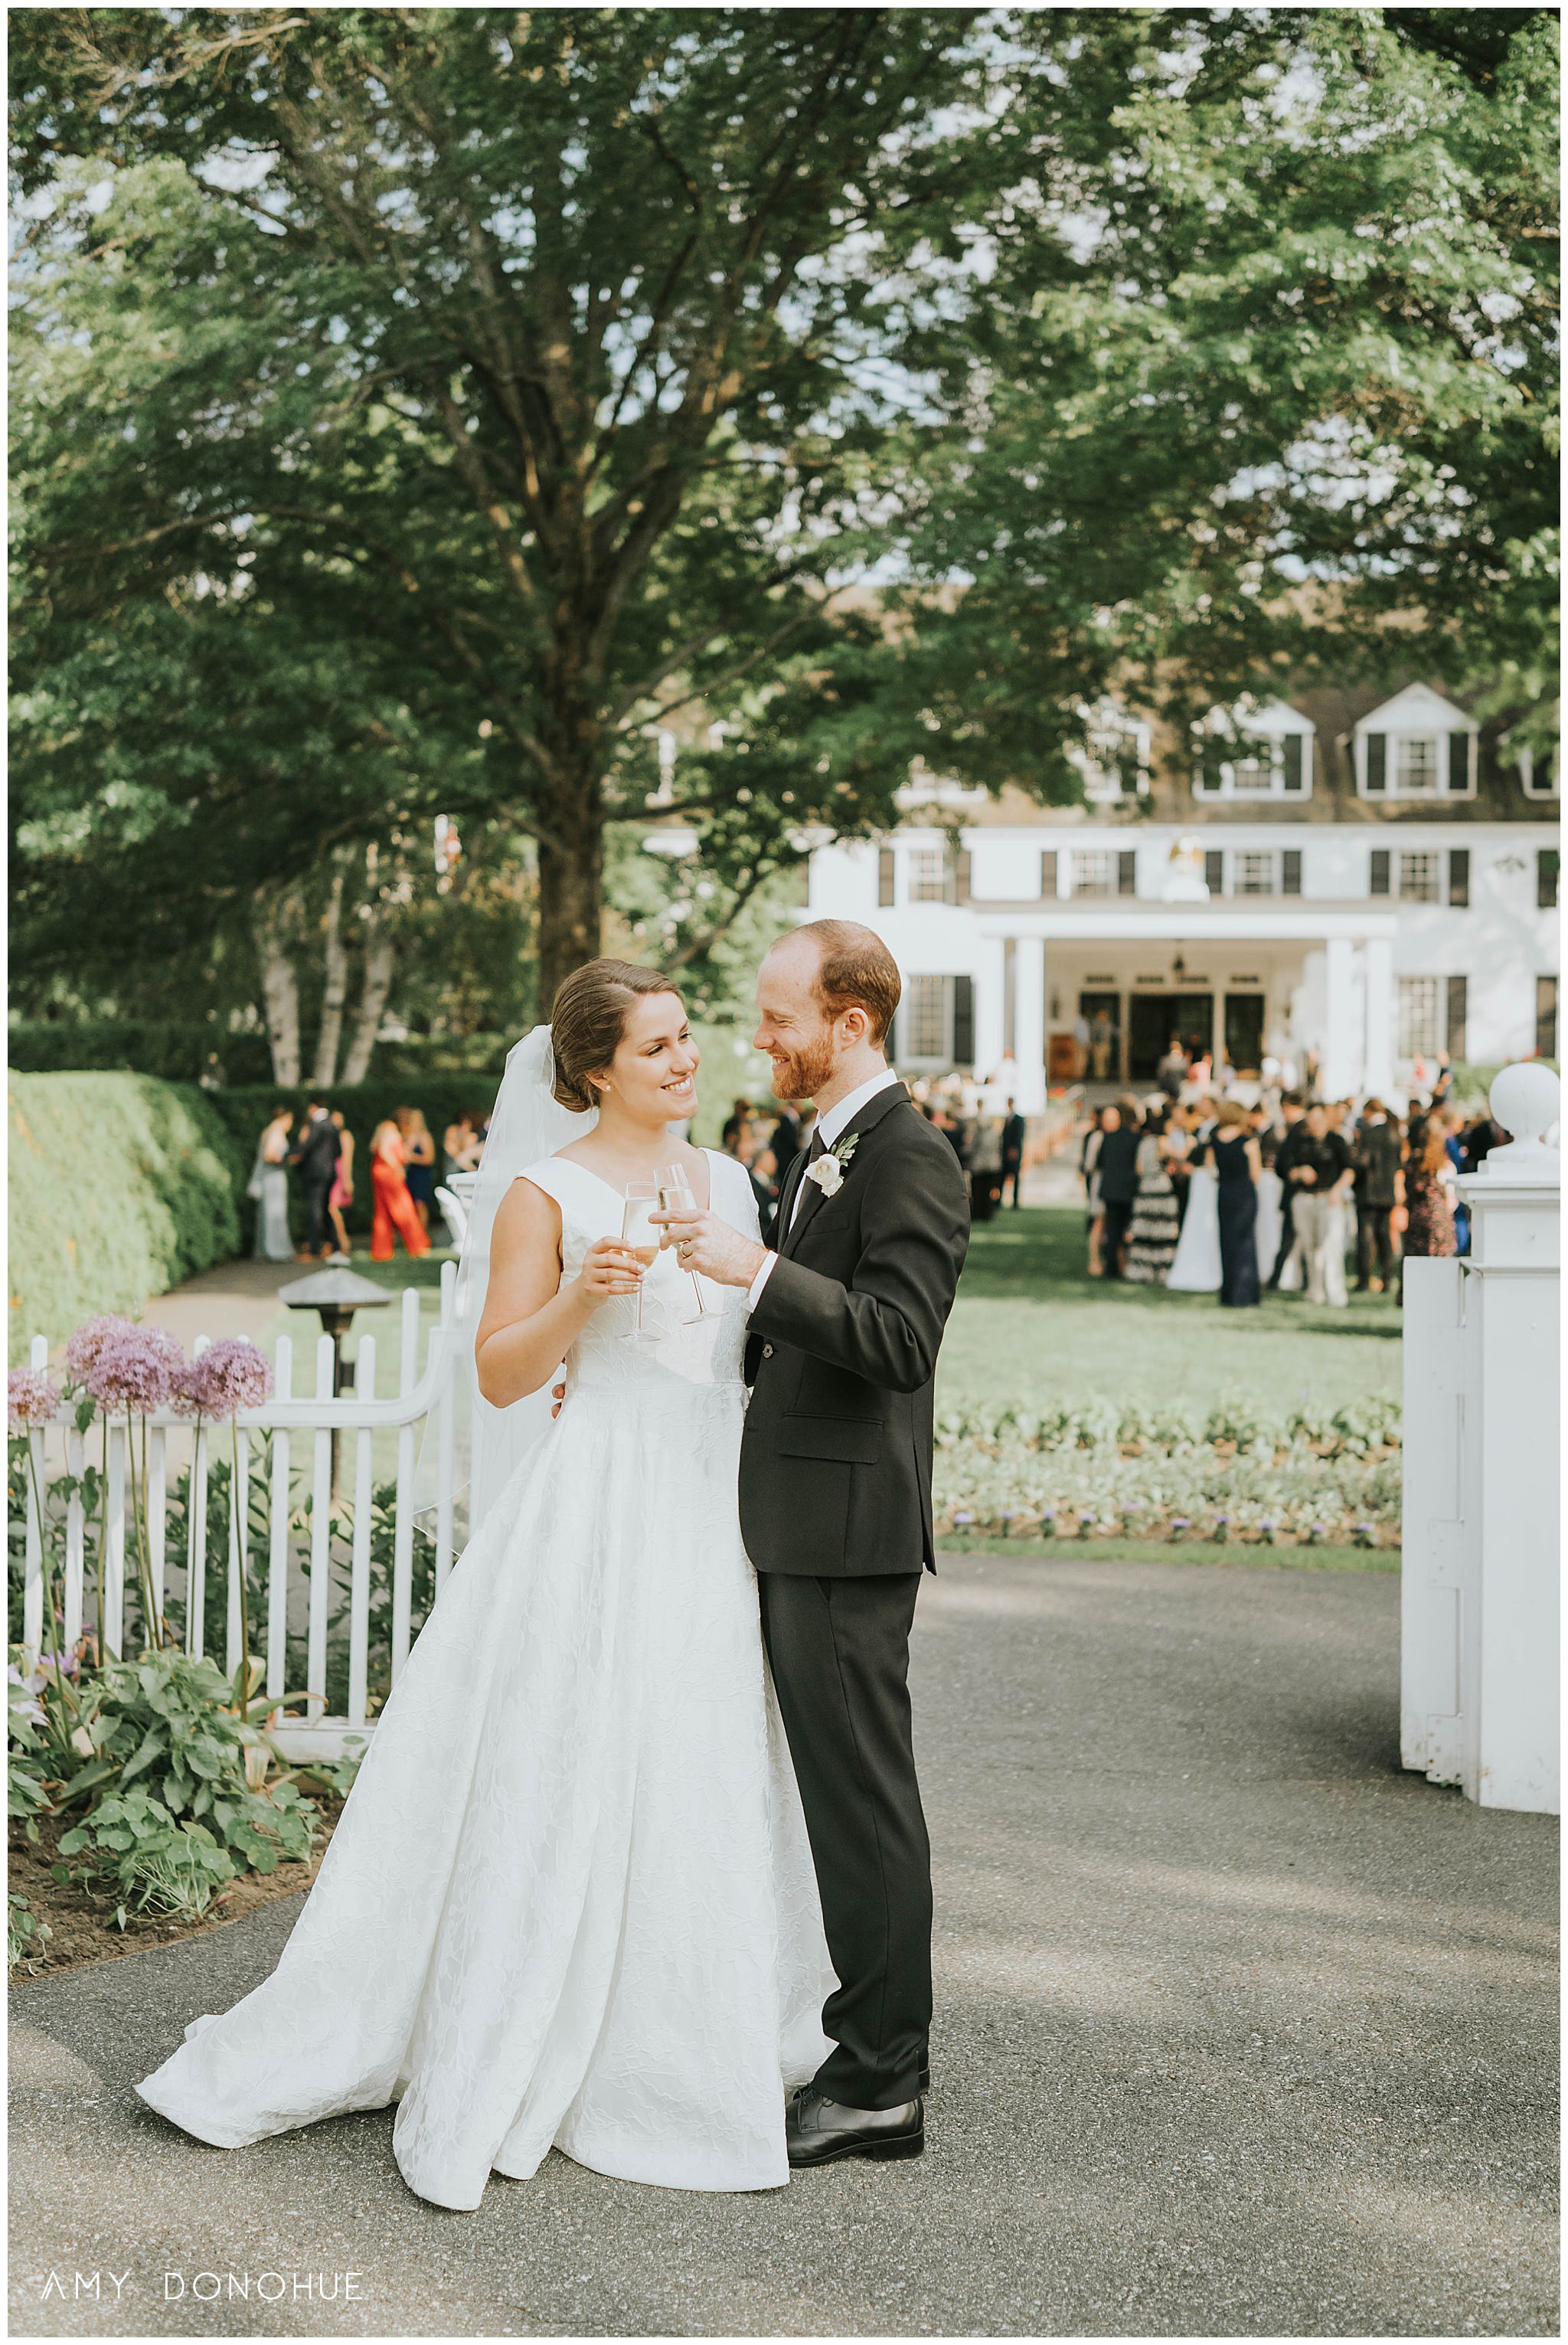 Bride and Groom toasting on the front lawn of The Woodstock Inn & Resort, Woodstock, Vermont